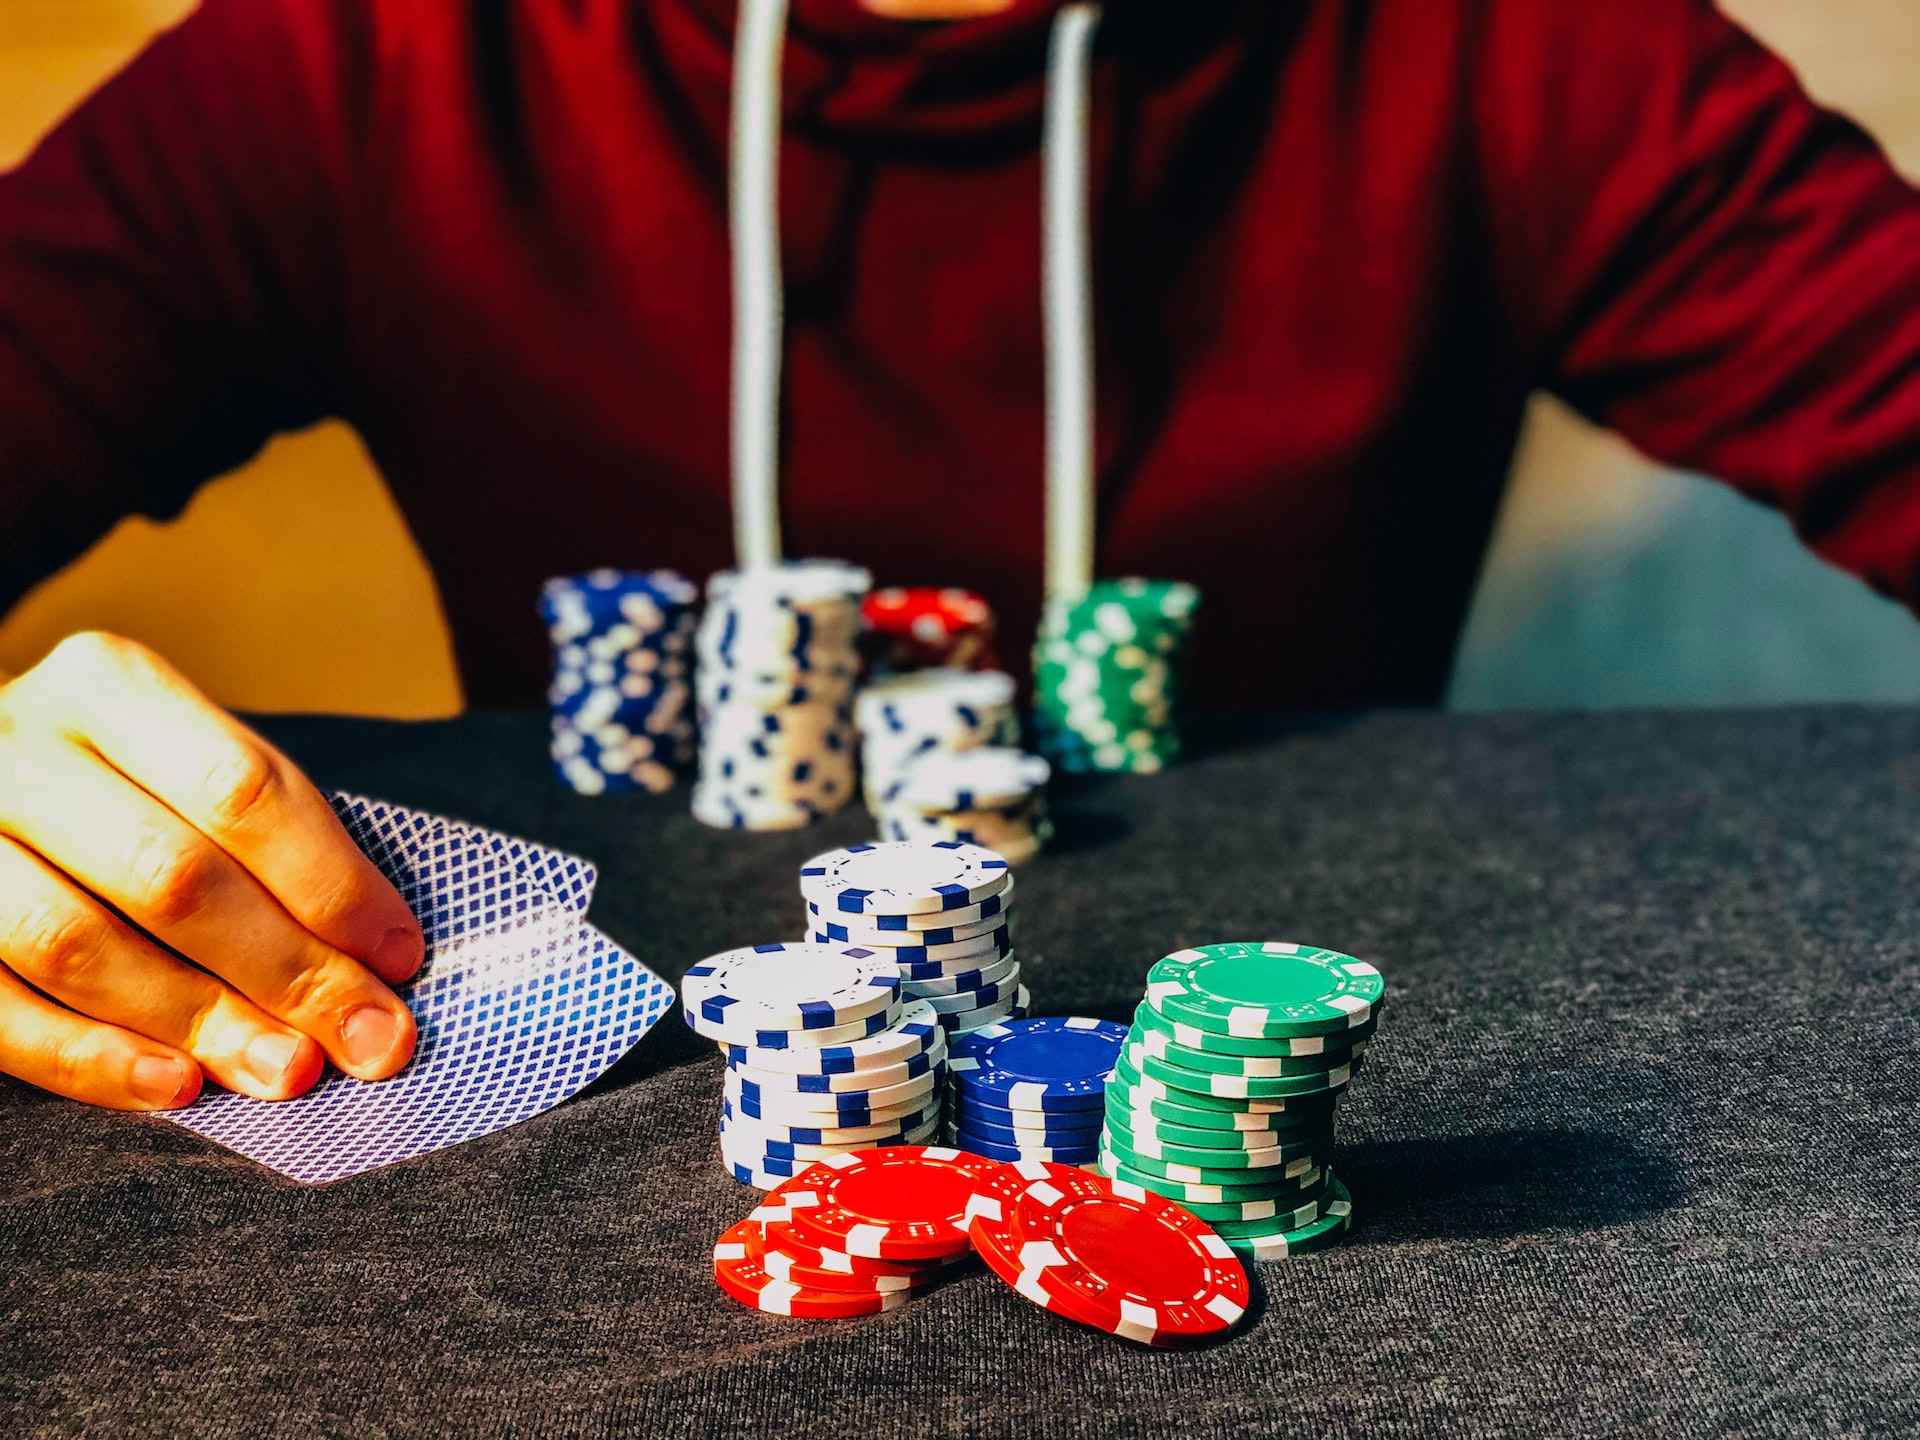 Most popular online casino games in the UK - About Manchester